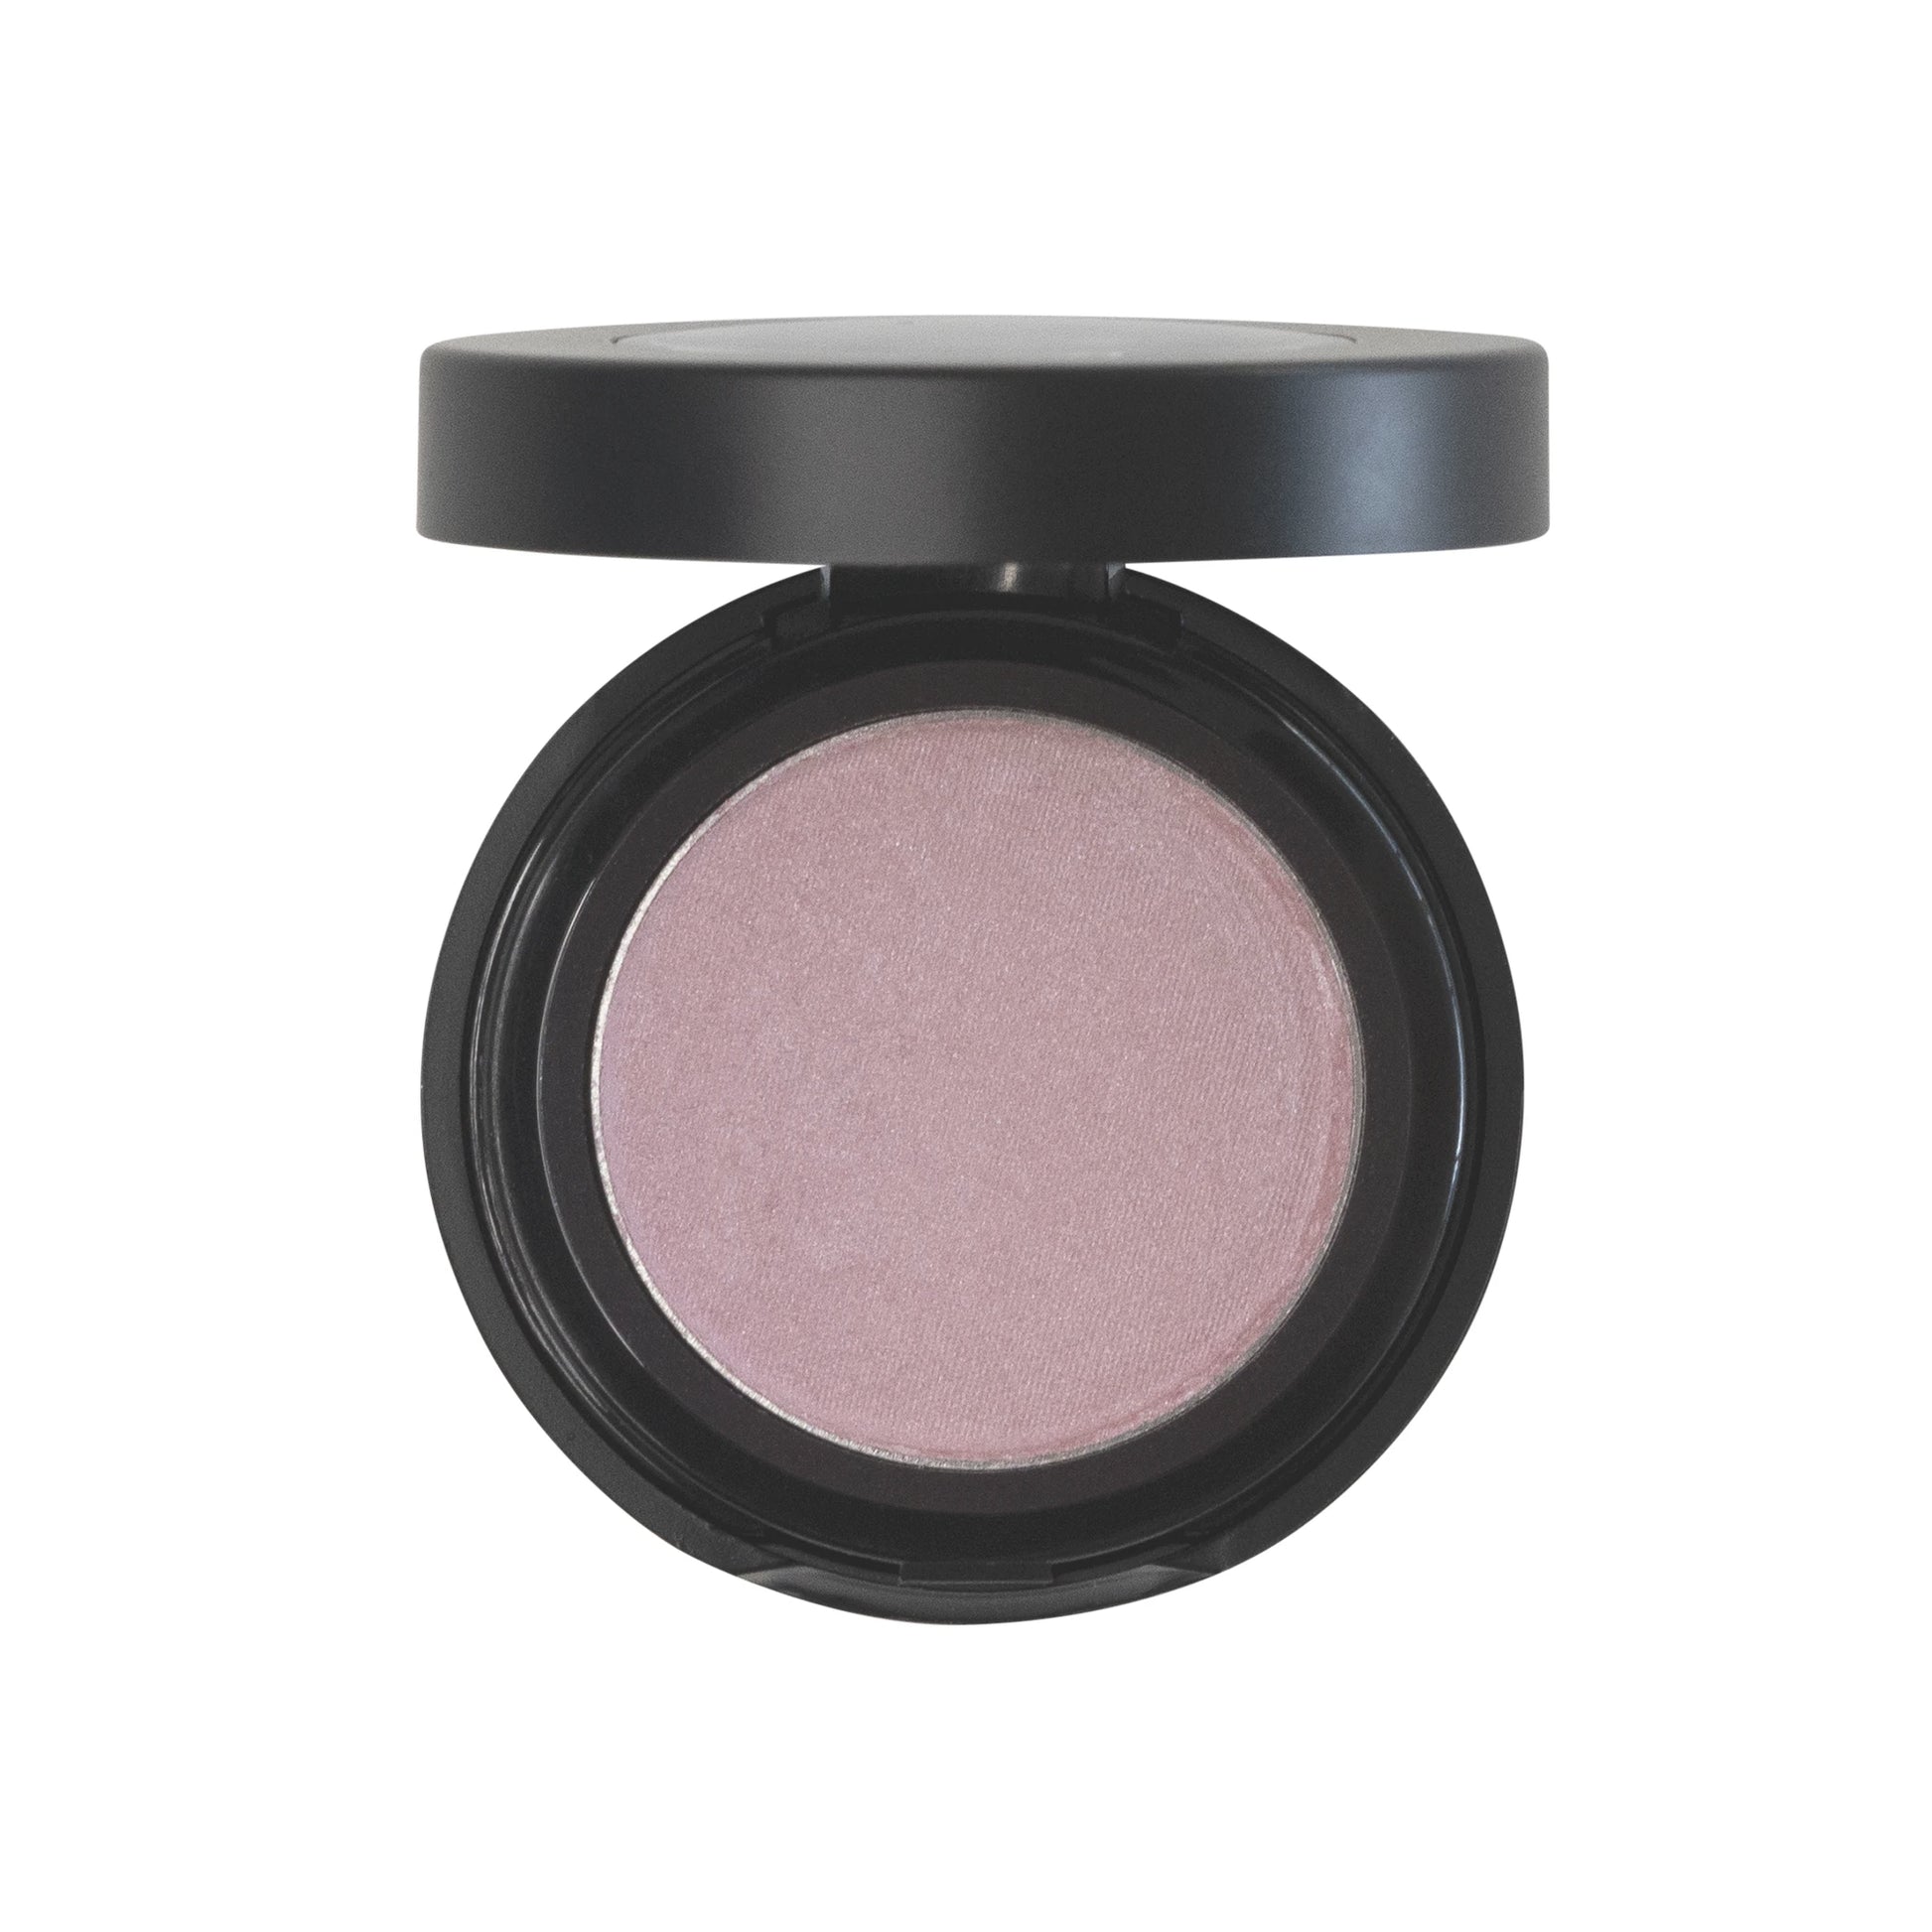 Bring out the bunny in your Cruisin Organics Bunny Single Pan Eyeshadow  image of beauty. Go to the intriguing time of Hugh Heffner and the bunny pace to life's new adventures. Make your fascinating face story.